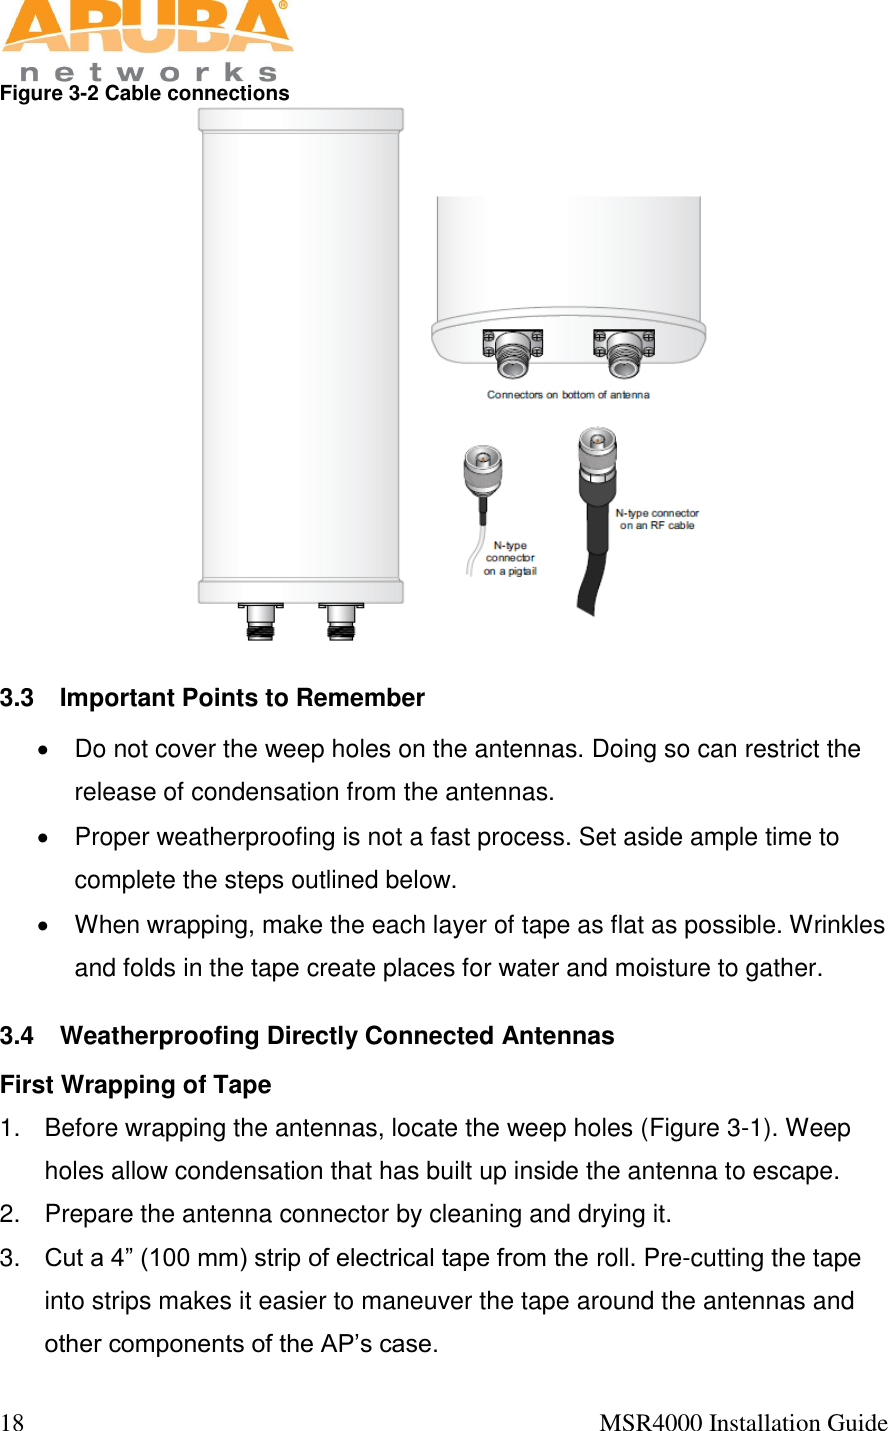  18                                                                                            MSR4000 Installation Guide   Figure 3-2 Cable connections  3.3  Important Points to Remember   Do not cover the weep holes on the antennas. Doing so can restrict the release of condensation from the antennas.   Proper weatherproofing is not a fast process. Set aside ample time to complete the steps outlined below.   When wrapping, make the each layer of tape as flat as possible. Wrinkles and folds in the tape create places for water and moisture to gather. 3.4  Weatherproofing Directly Connected Antennas First Wrapping of Tape 1.  Before wrapping the antennas, locate the weep holes (Figure 3-1). Weep holes allow condensation that has built up inside the antenna to escape. 2.  Prepare the antenna connector by cleaning and drying it. 3. Cut a 4” (100 mm) strip of electrical tape from the roll. Pre-cutting the tape into strips makes it easier to maneuver the tape around the antennas and other components of the AP’s case. 